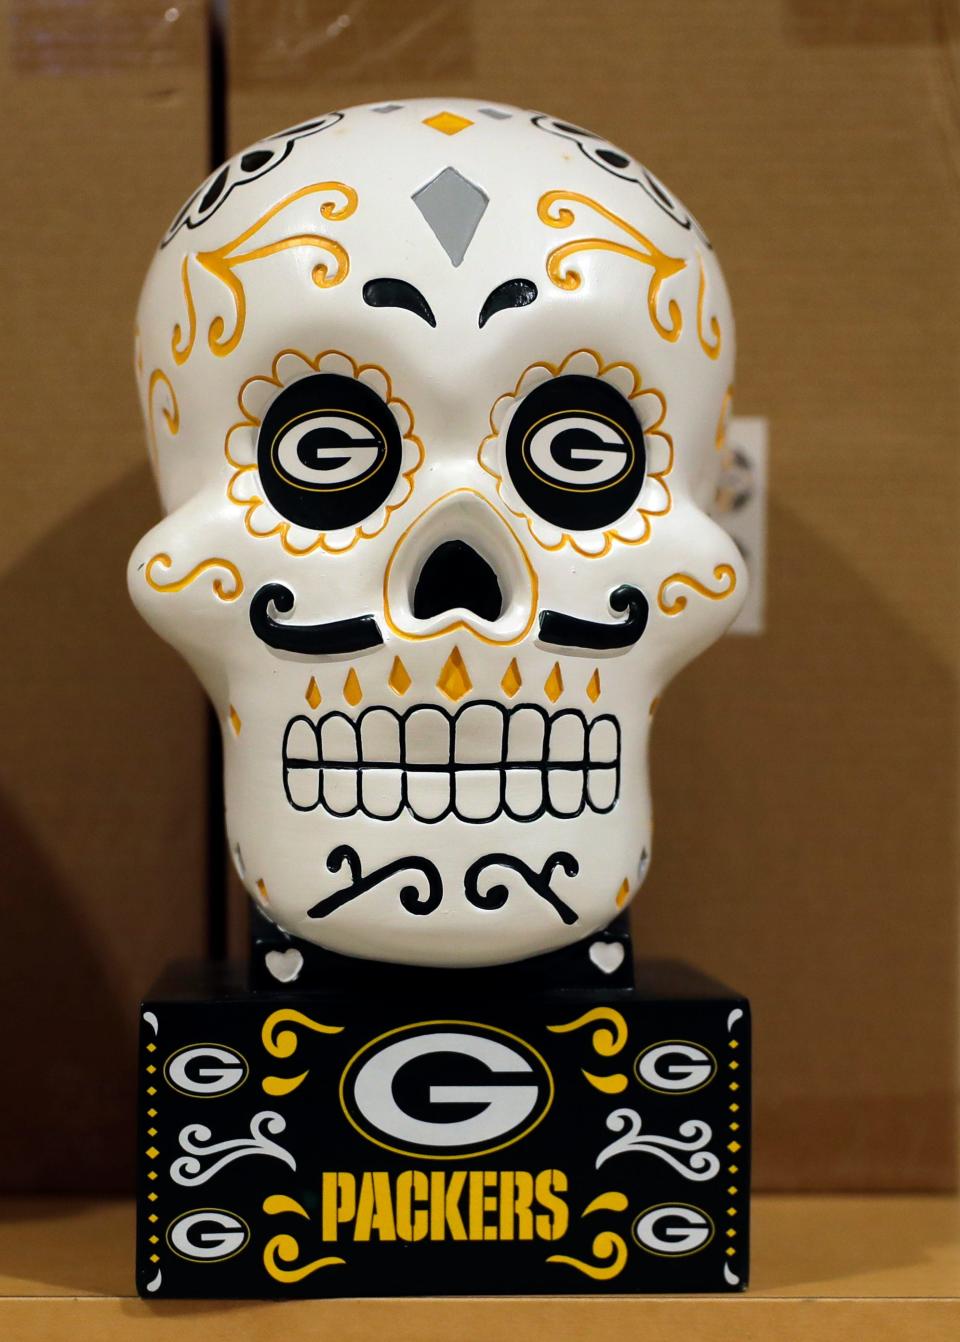 A Día de los Muertos Green Bay Packers skull for sale at the Packers Pro Shop on Jan. 17, 2023, in Green Bay, Wis.